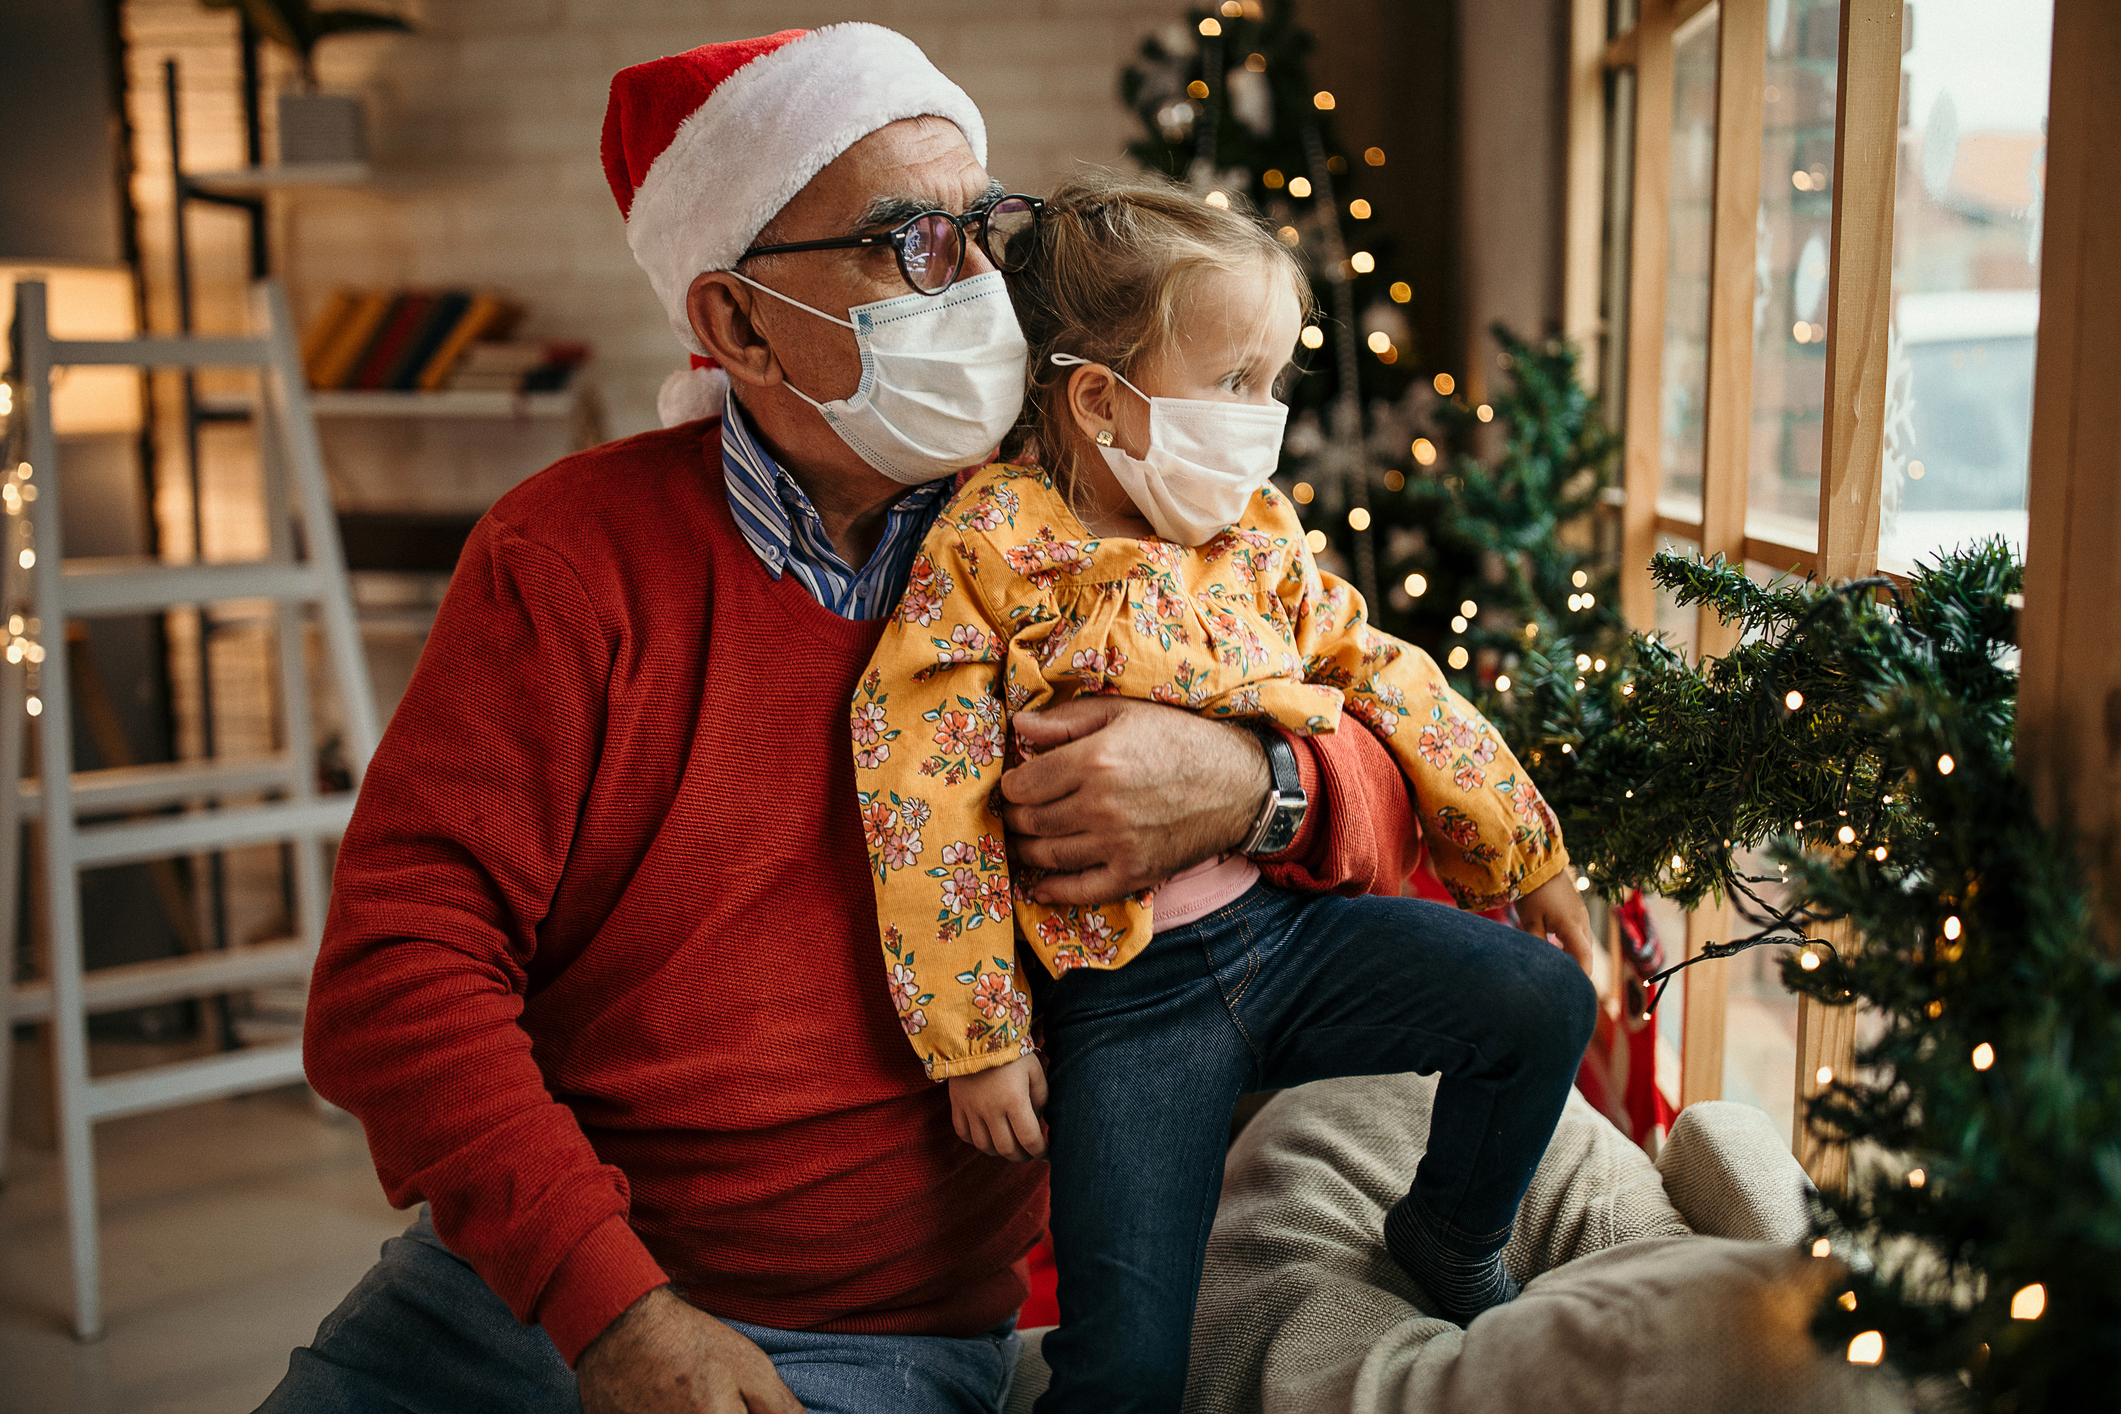 Exposed to COVID-19 Over the Holidays? Now What?